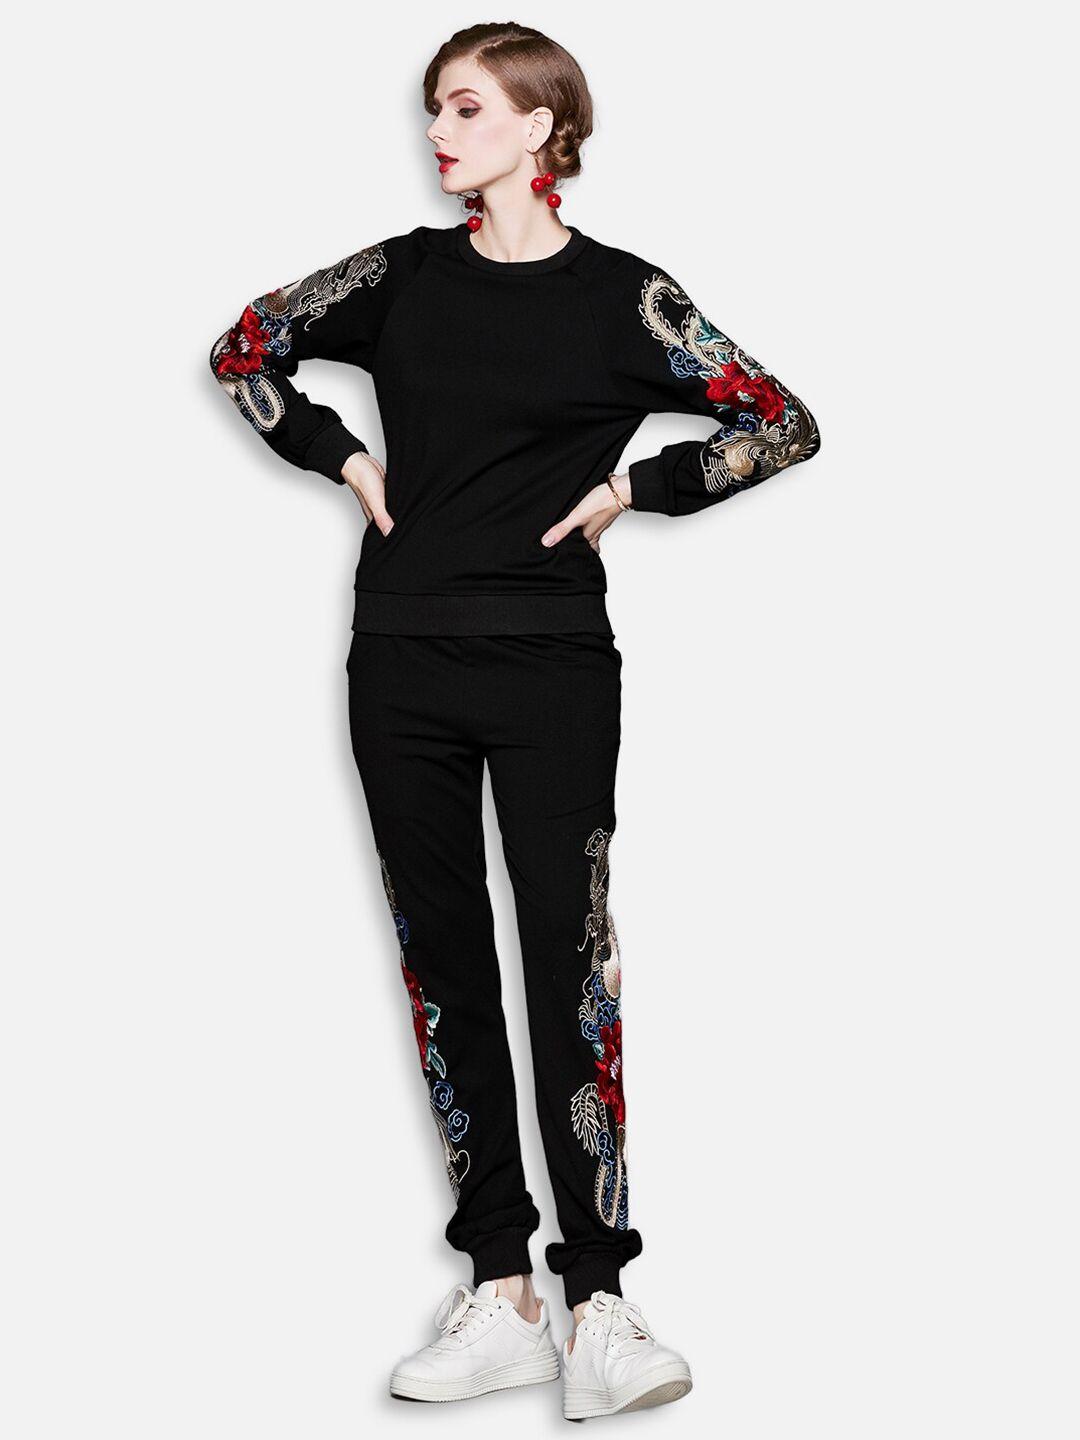 jc collection women black & red t-shirt with joggers joggers